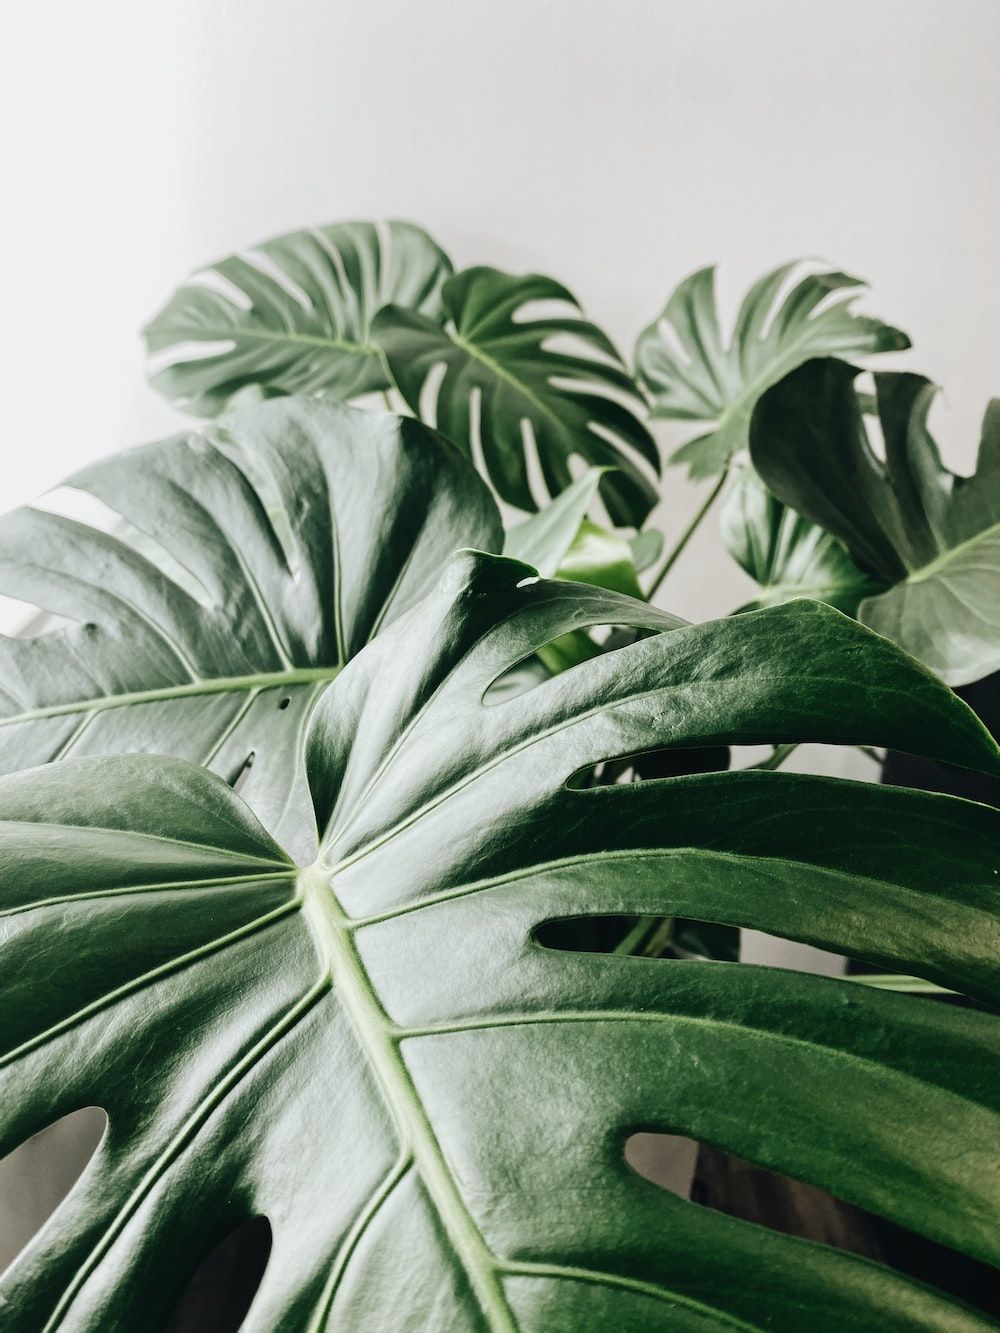 A close up of a green leafy plant - Monstera